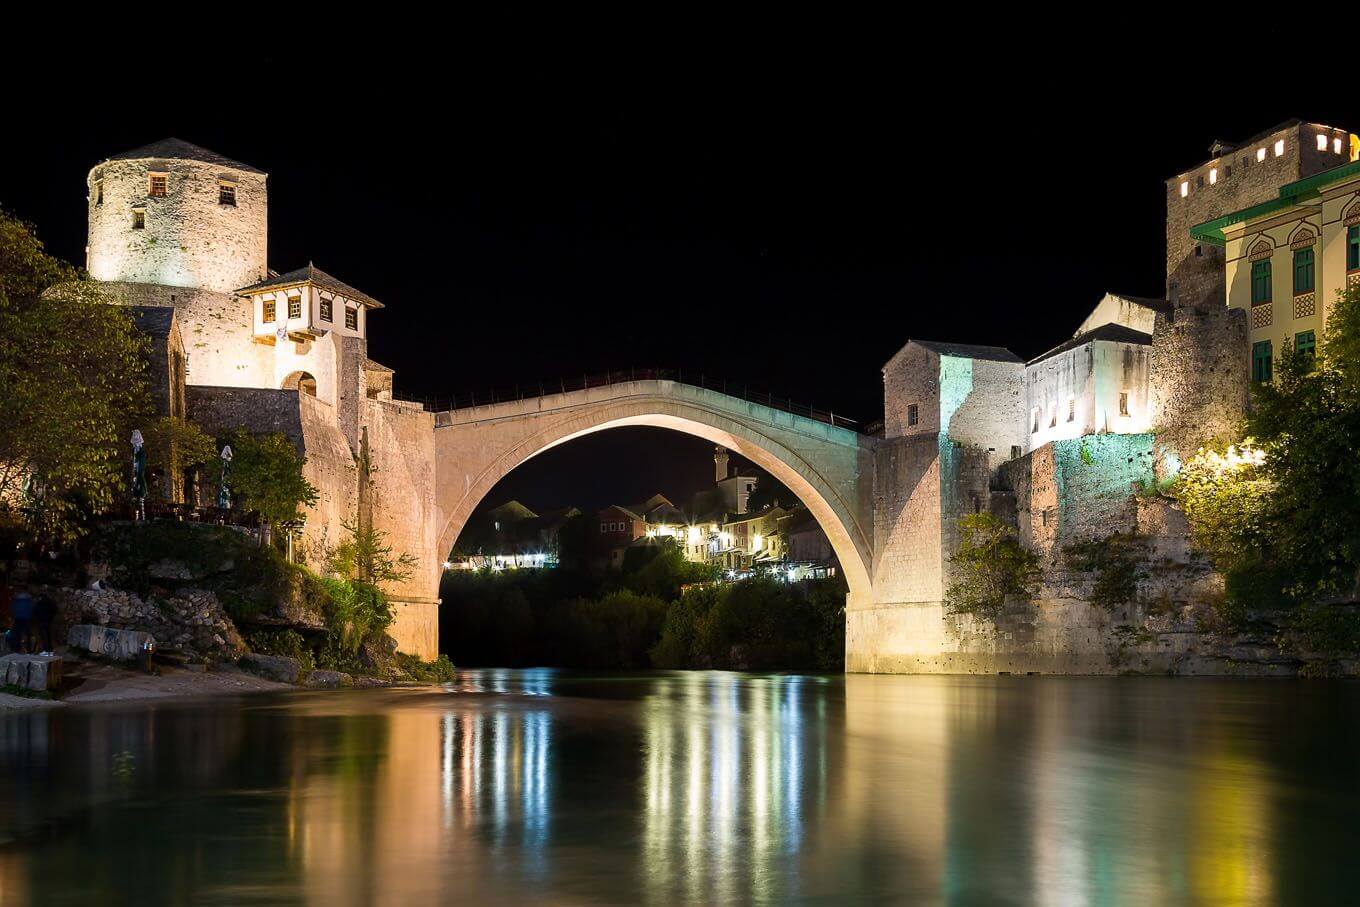 Photograph of the famous bridge Stari Most in Mostar